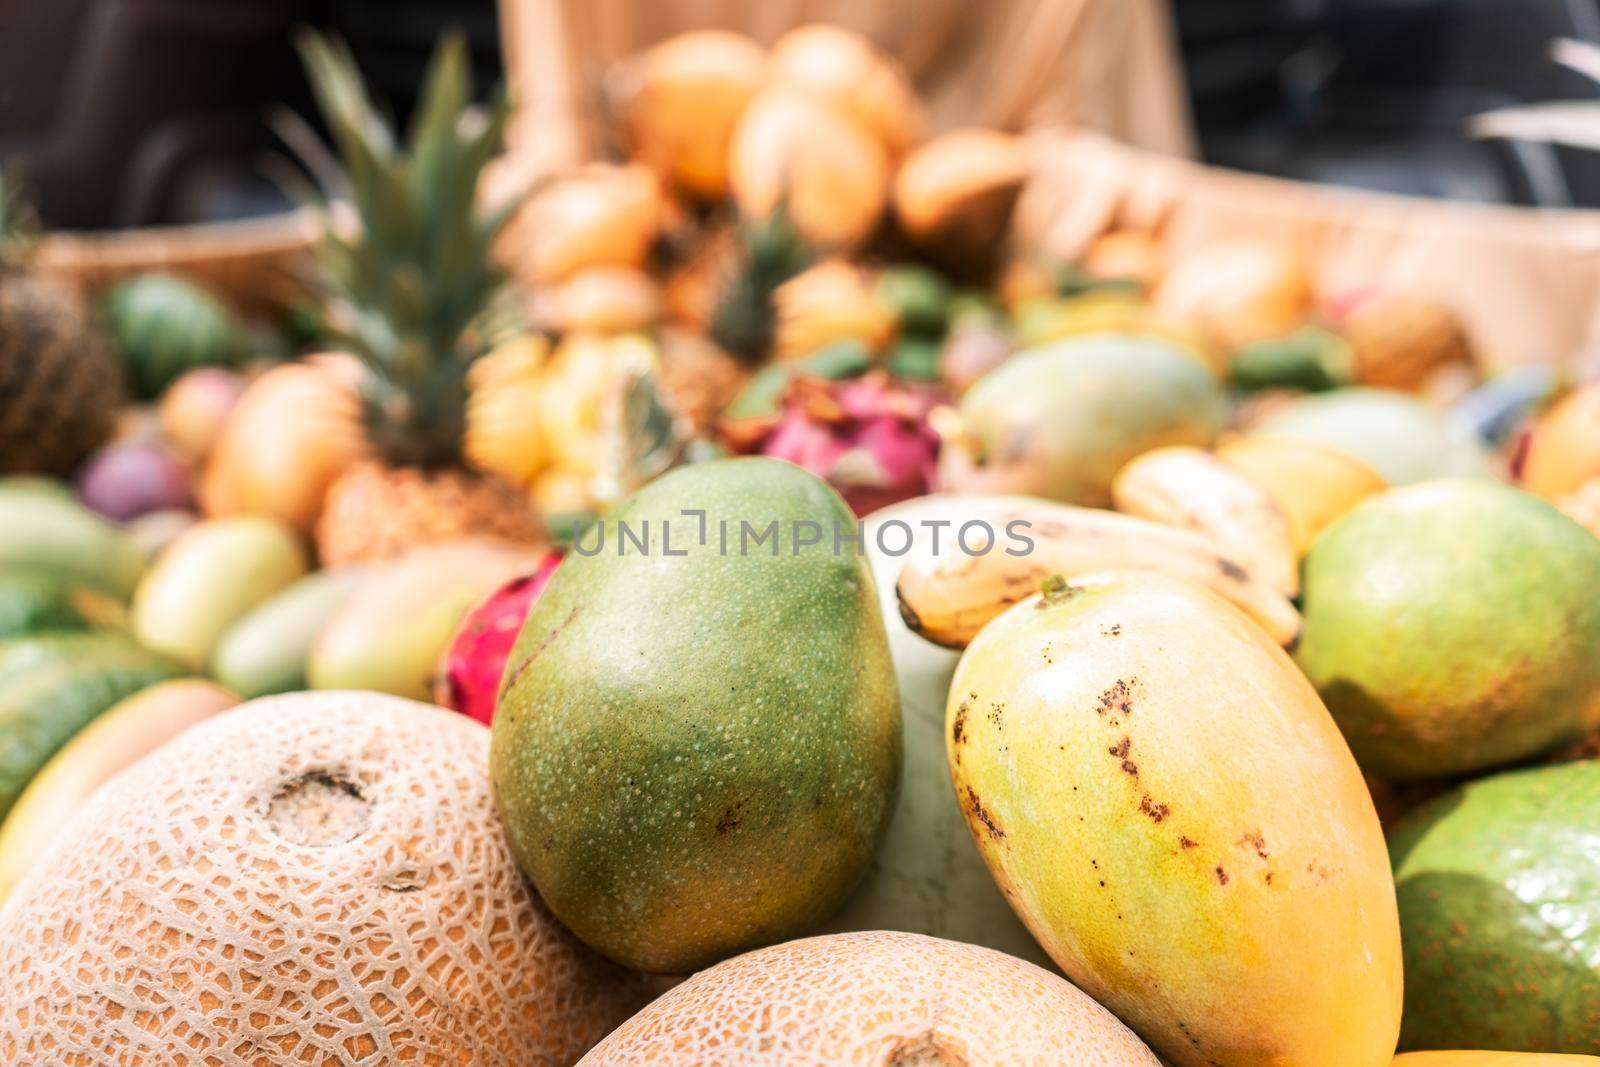 Latin American fruits. Concept of colors and production in Nicaragua by cfalvarez